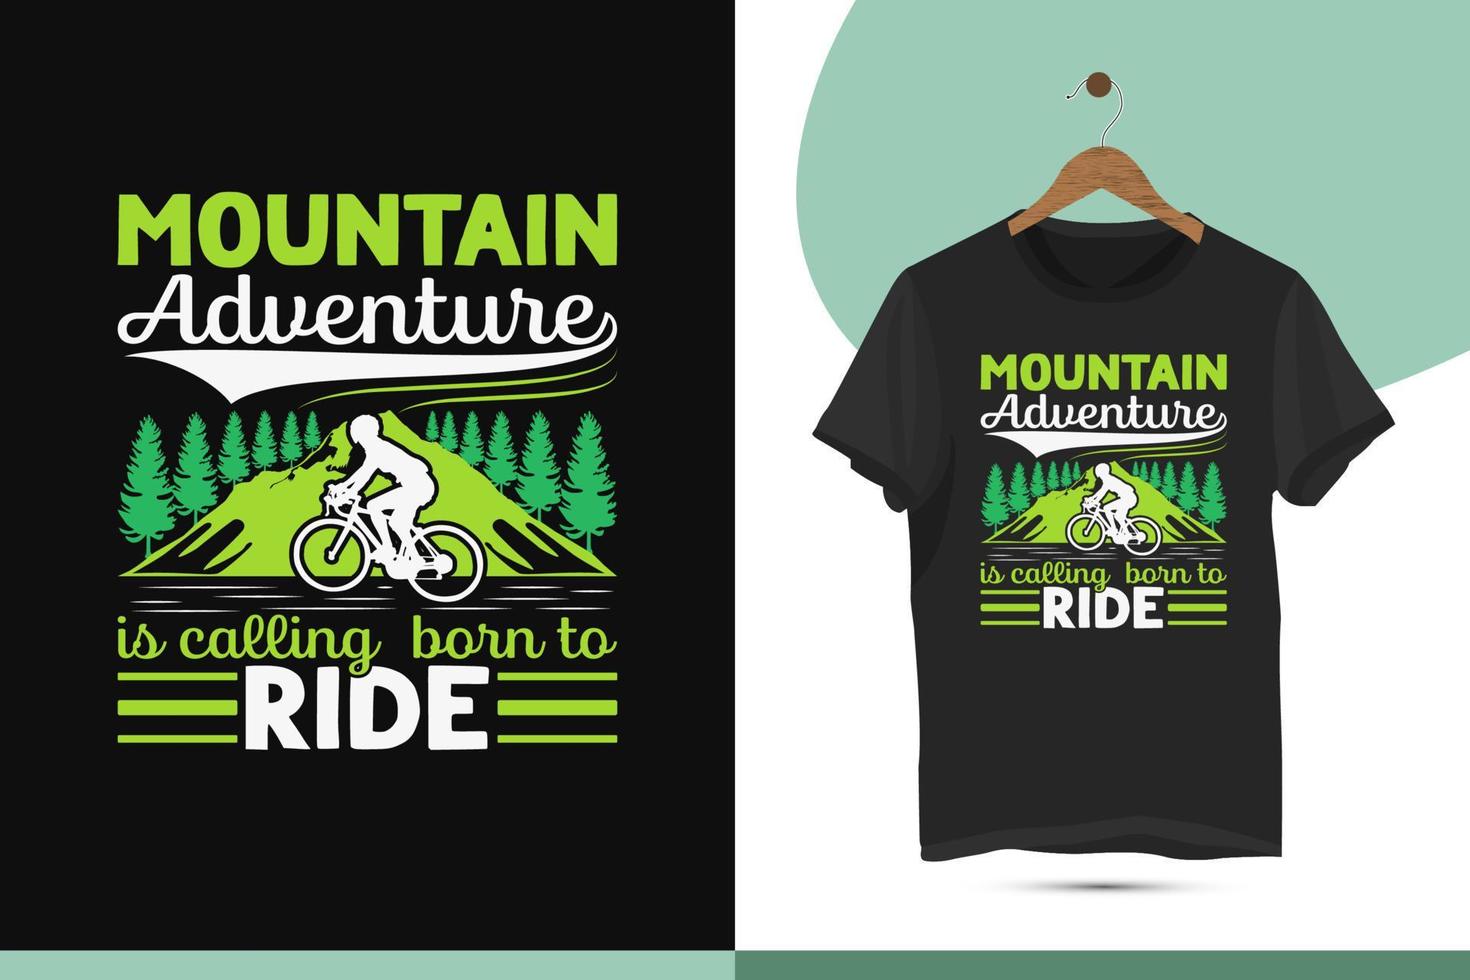 Mountain adventure is calling born to ride - Mountain ride t-shirt design template. Vector illustration with cycling, bike, Hill, and riding silhouettes. Print for shirts, bags, mugs, and other uses.